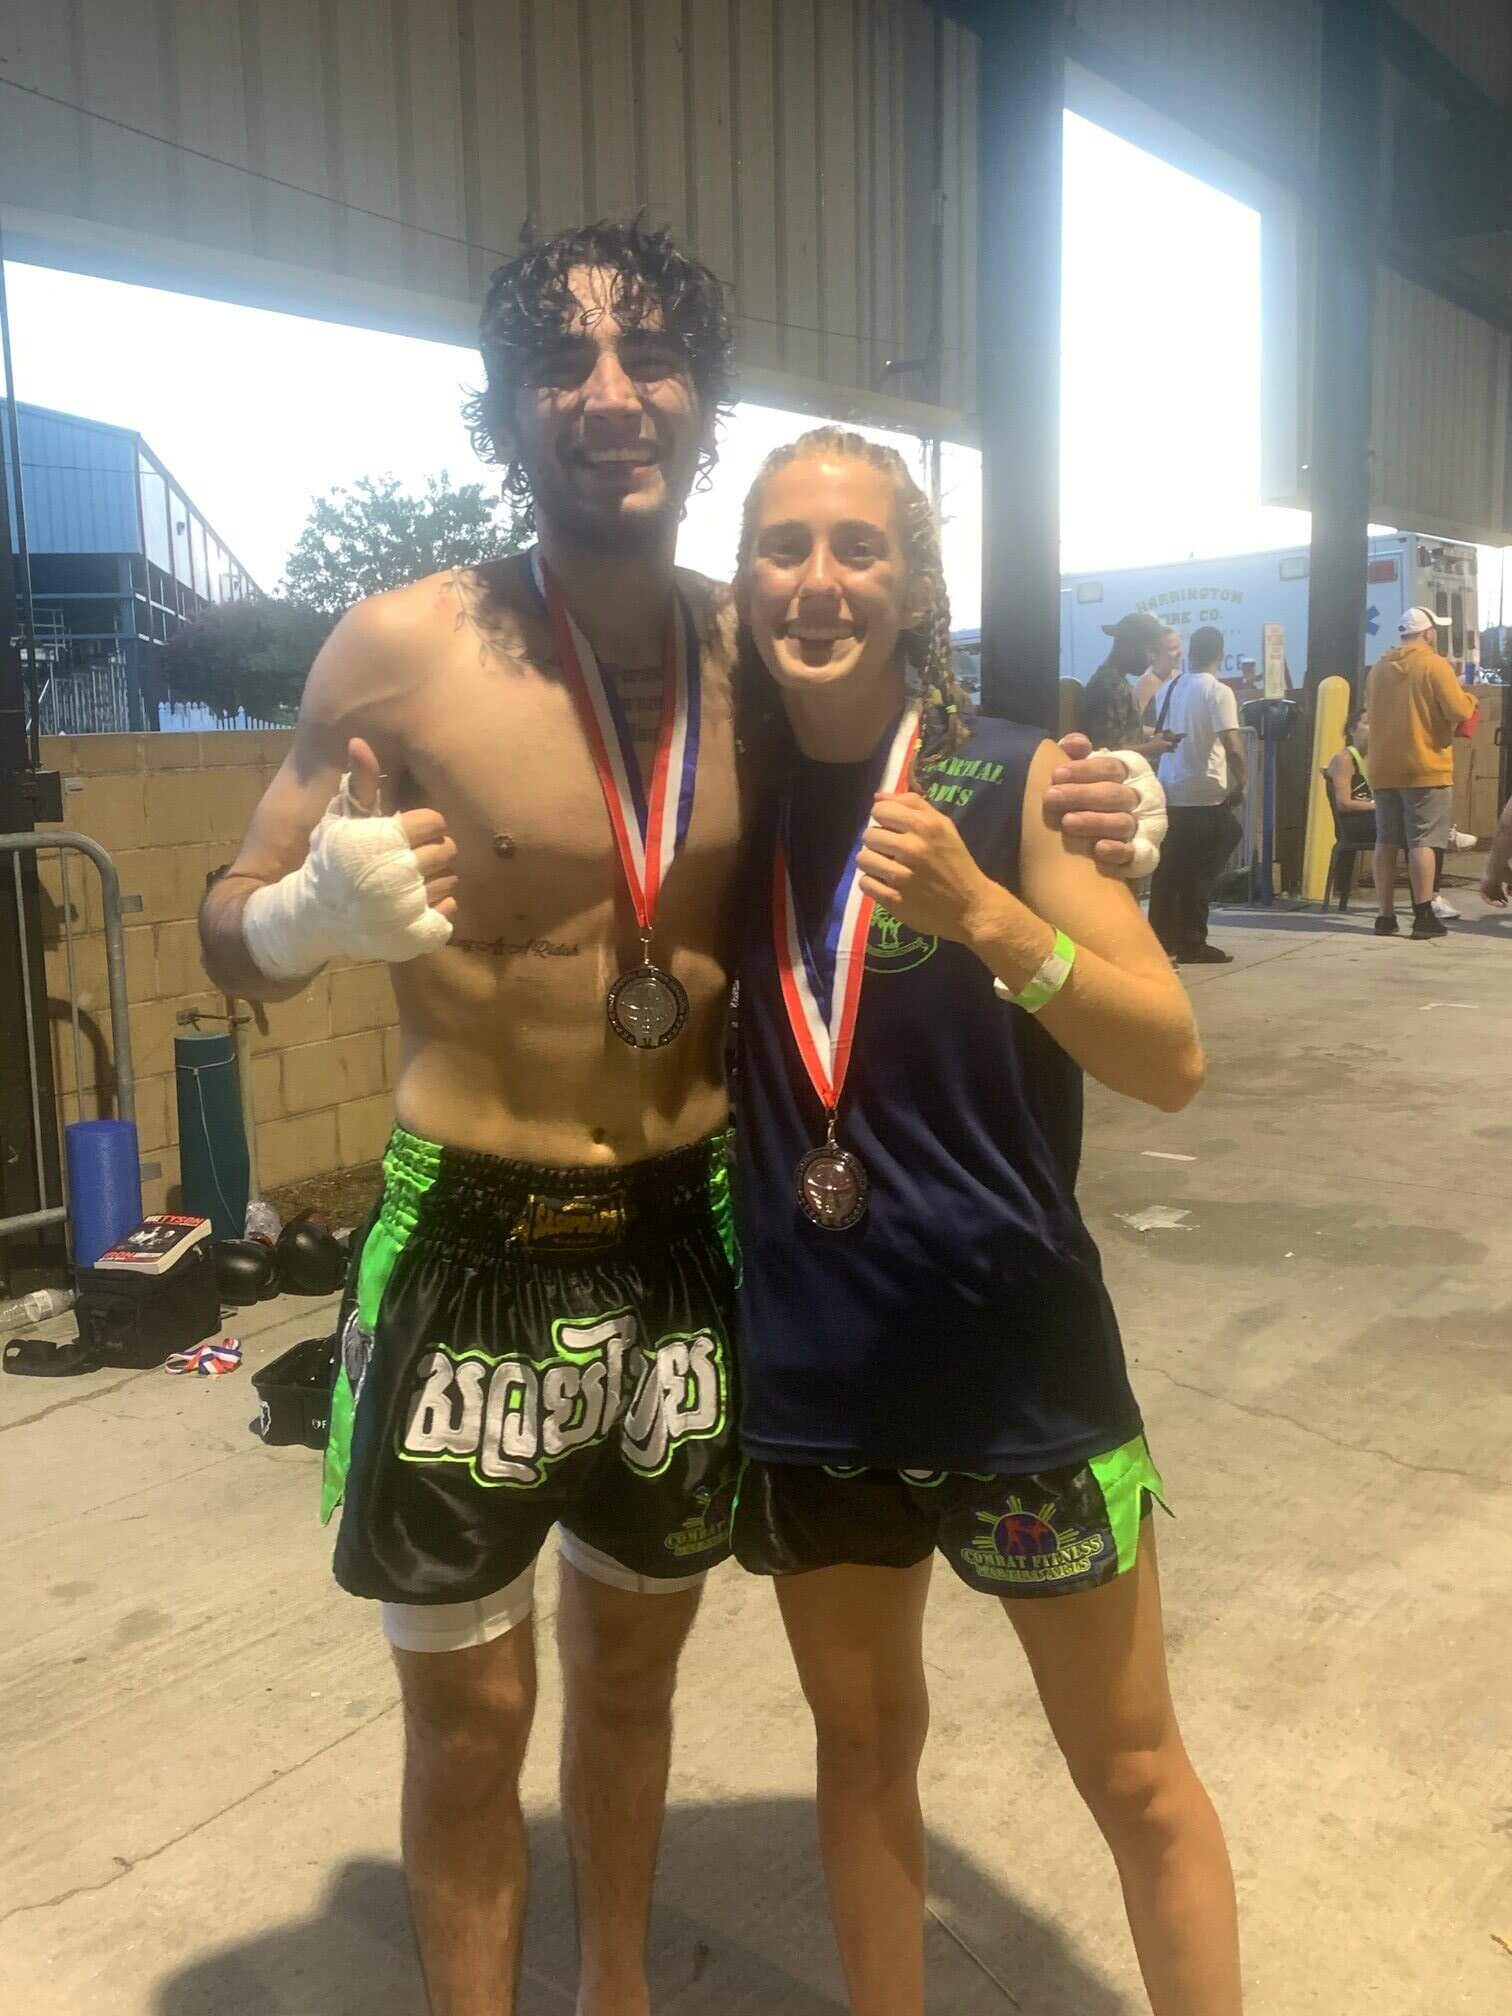 Two kickboxers happy at match